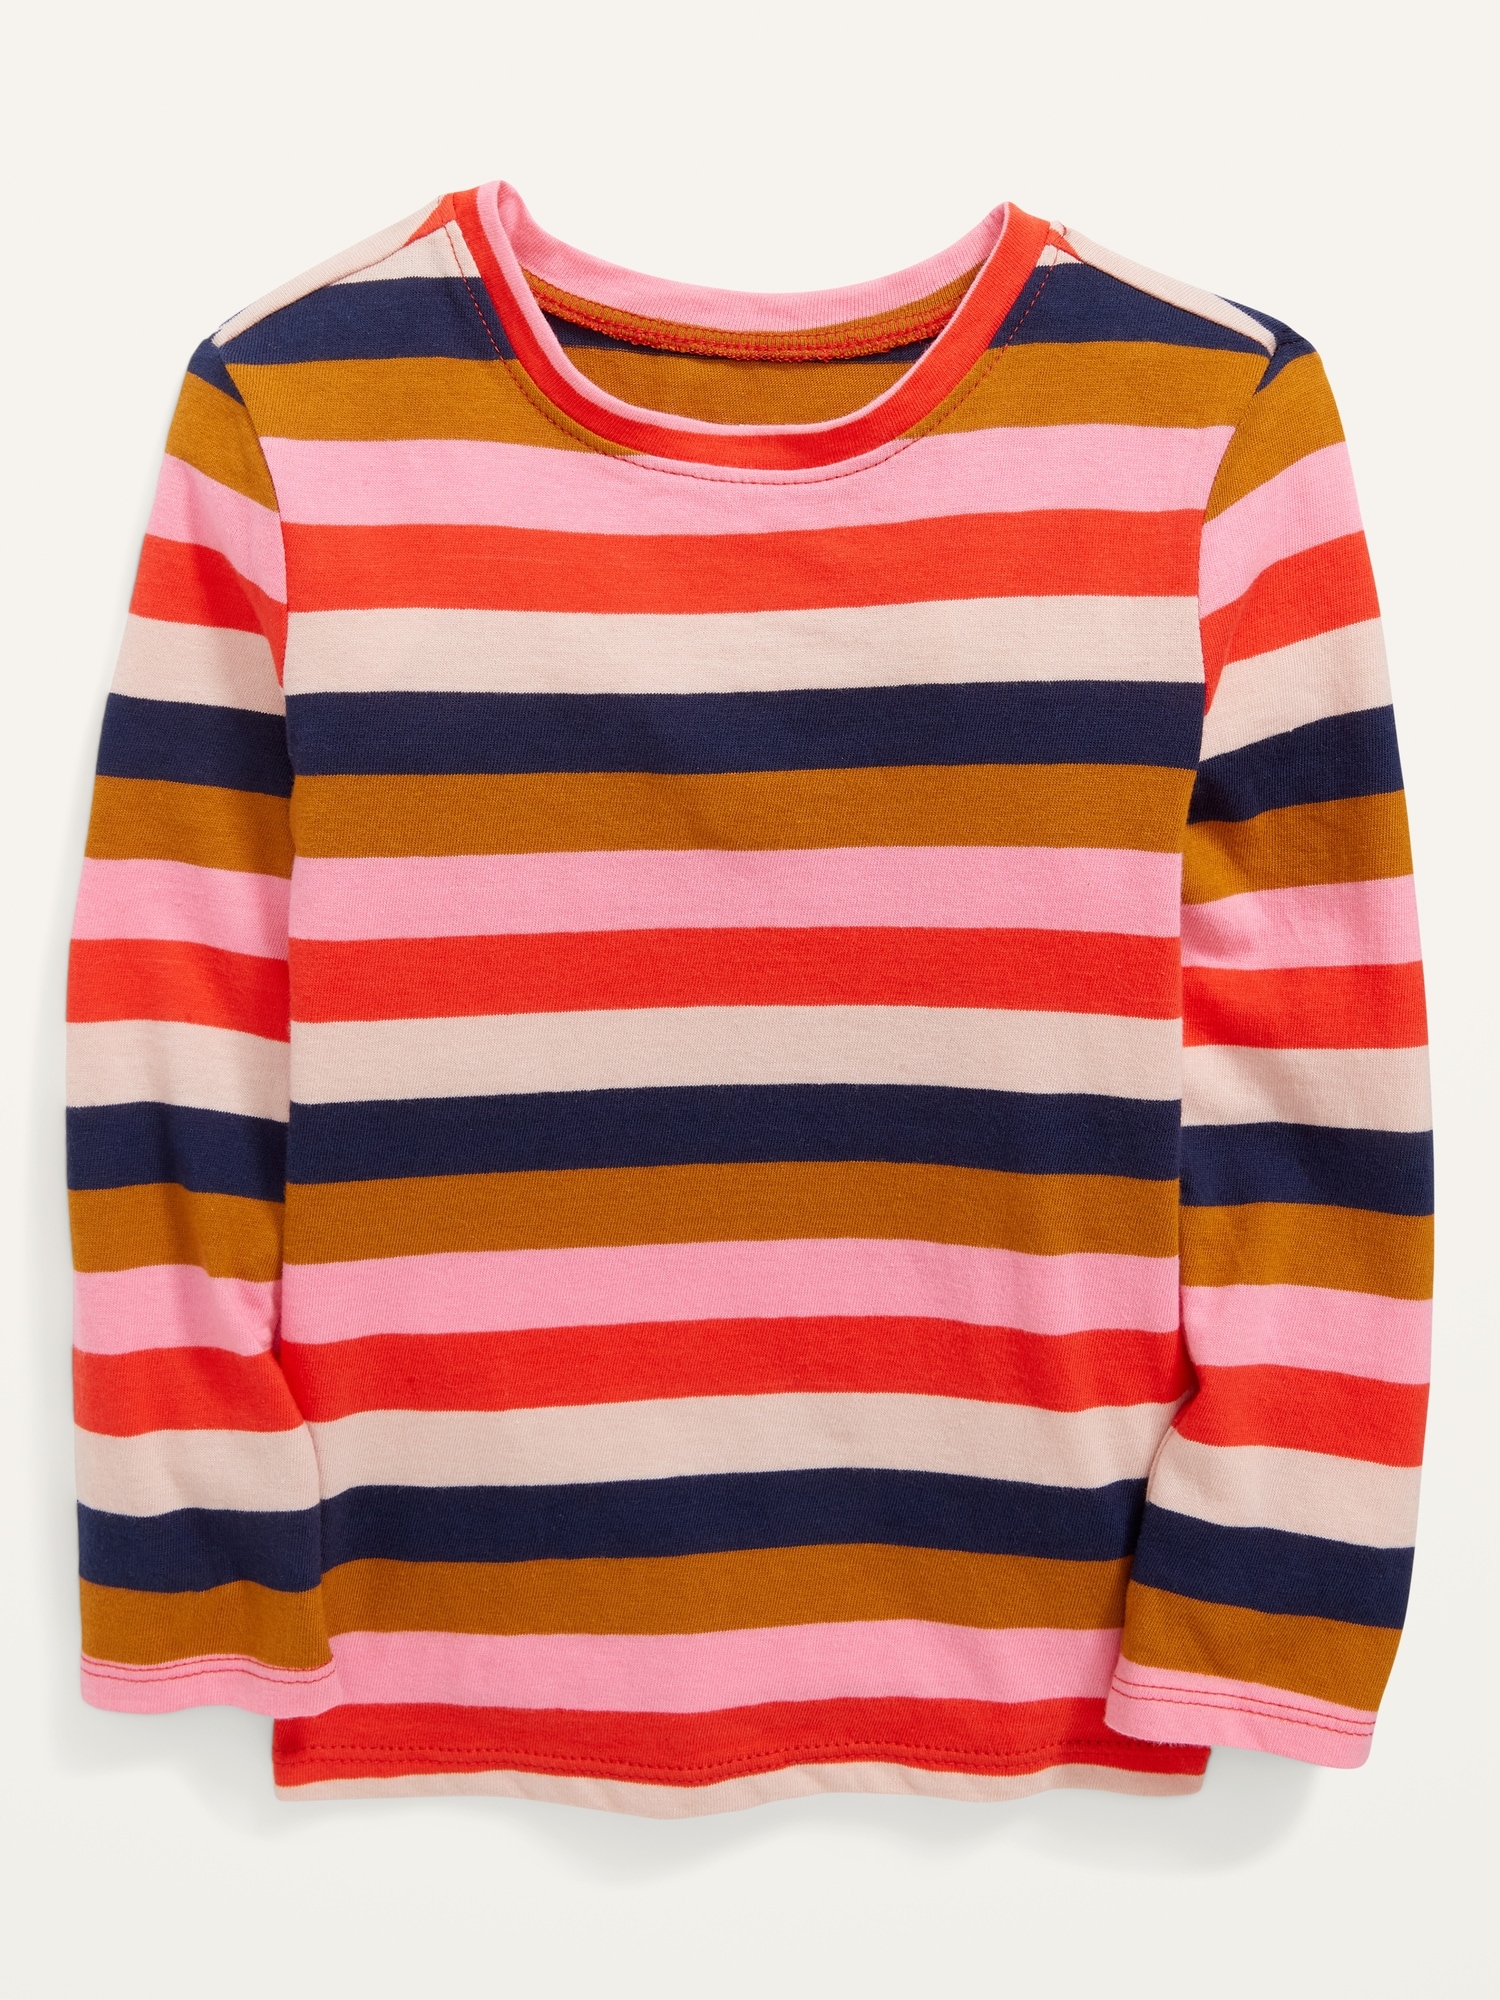 Printed Long-Sleeve T-Shirt for Toddler Girls | Old Navy